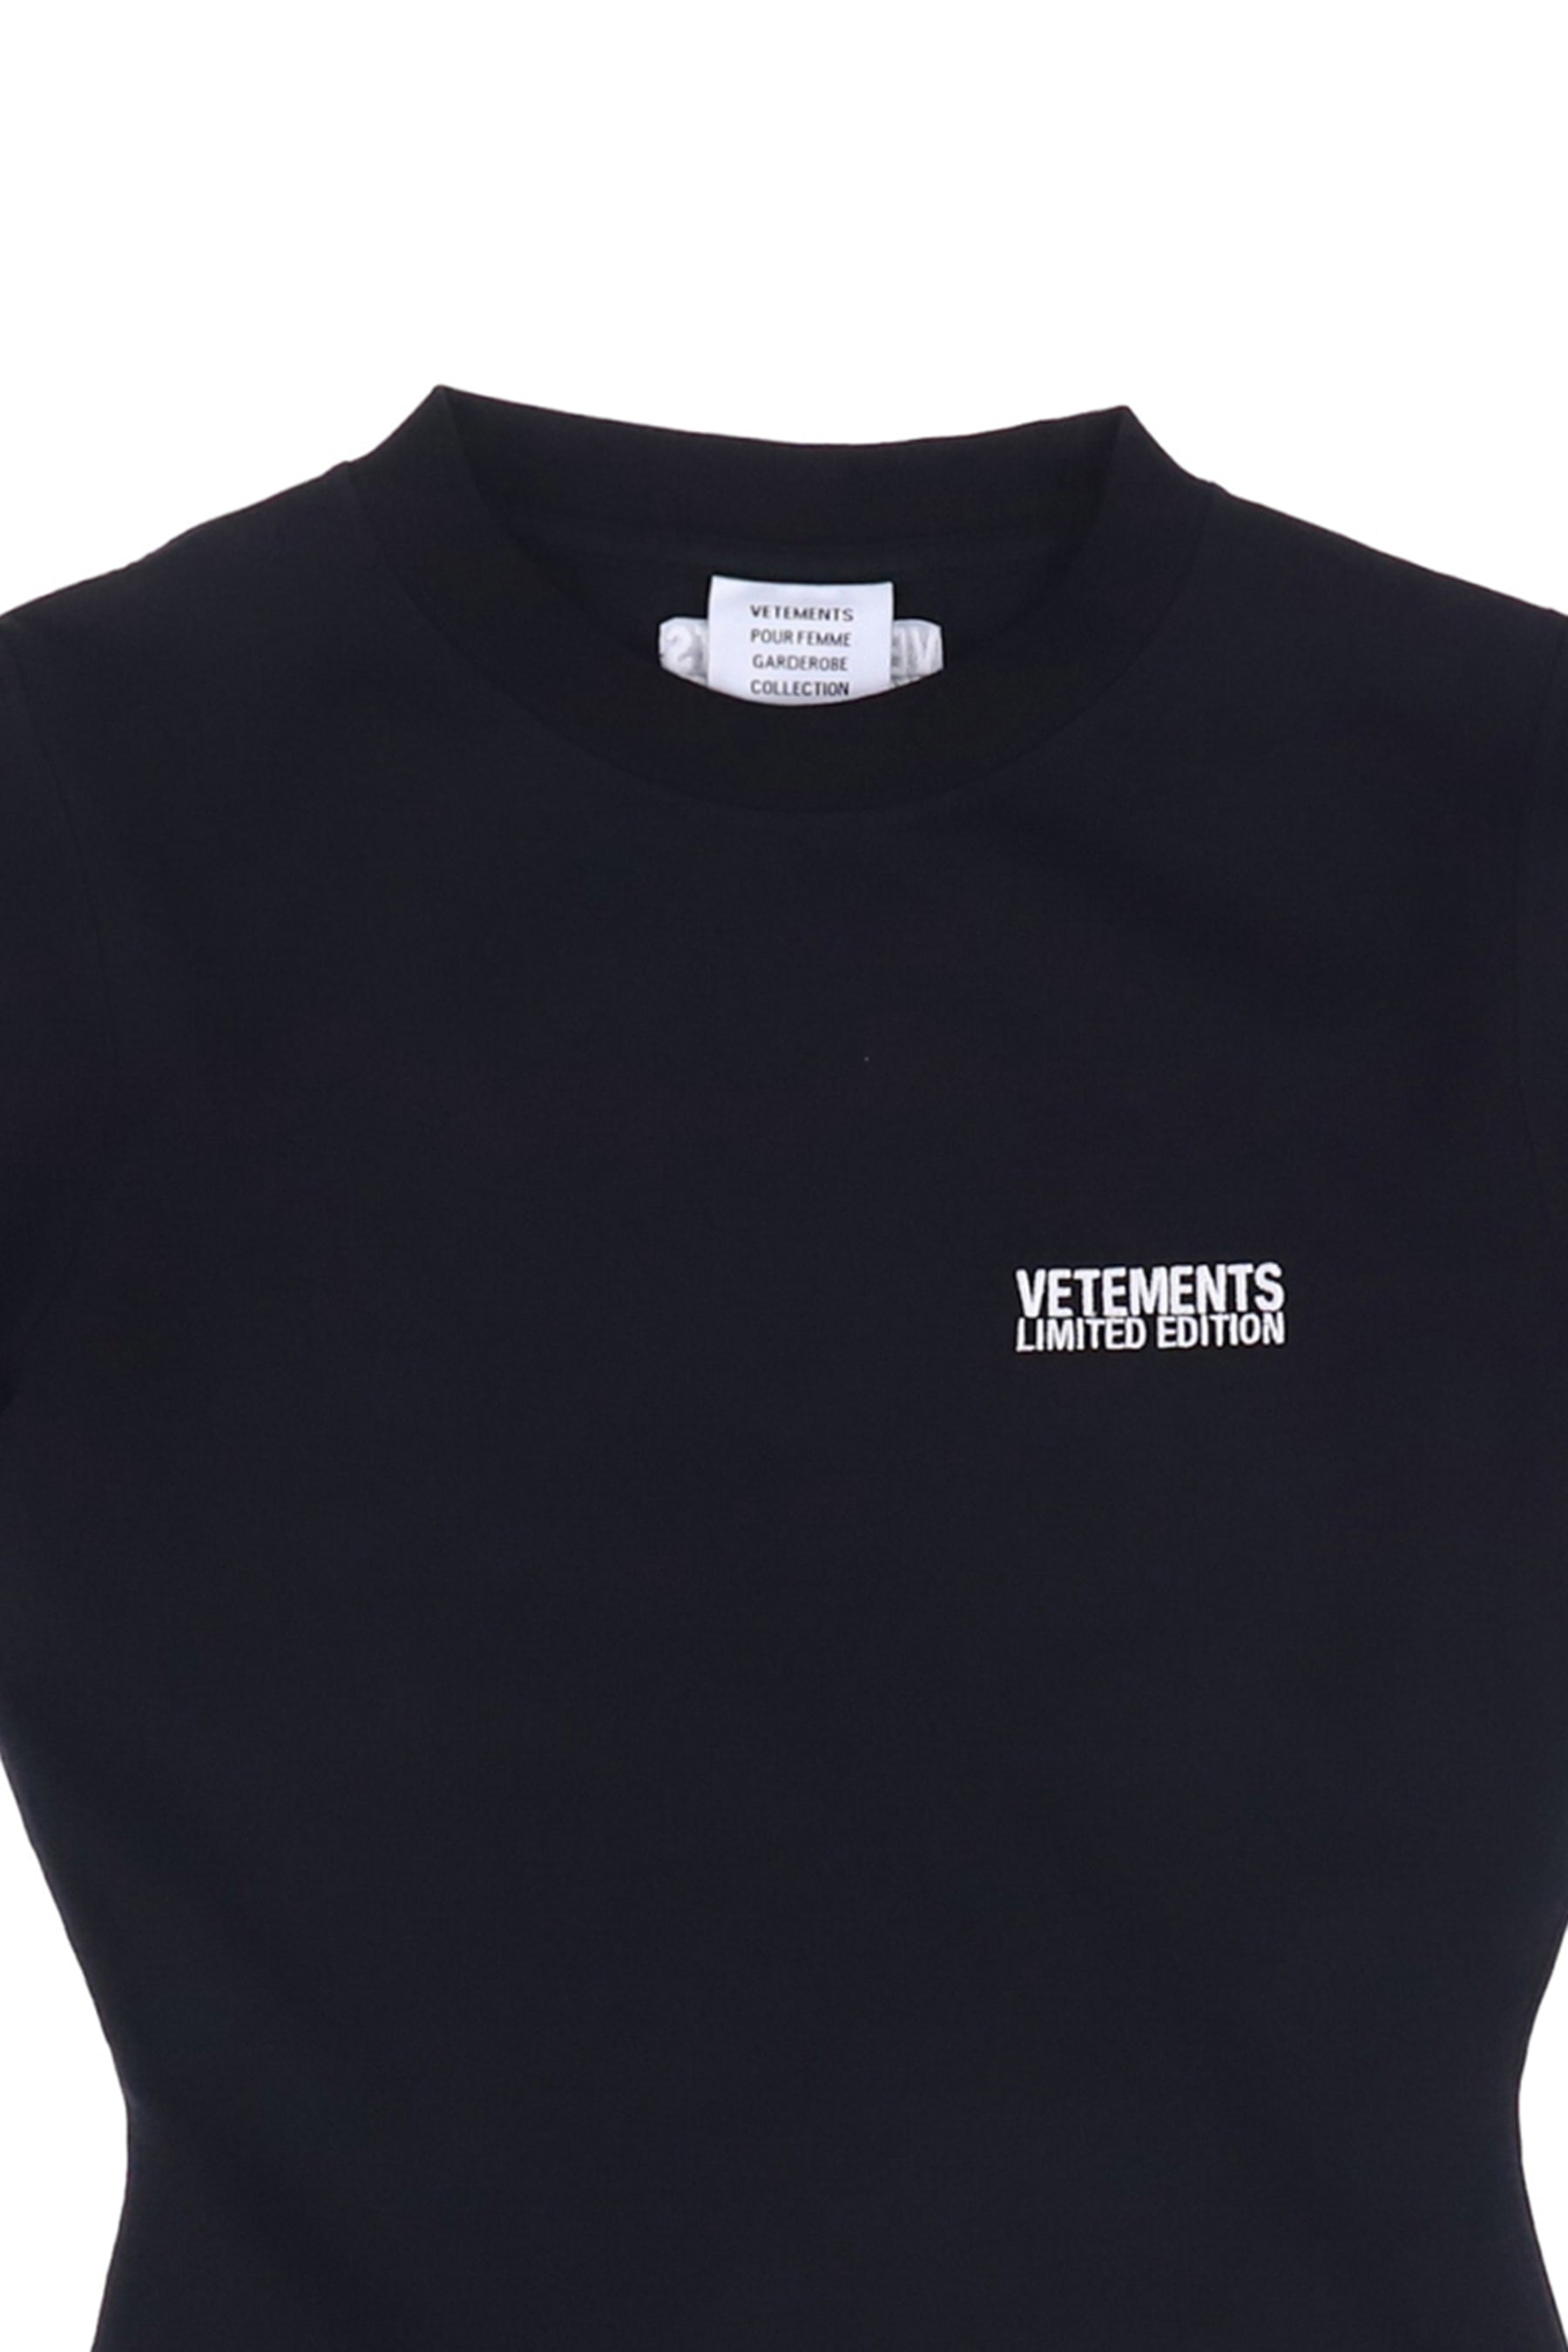 EMBROIDERED LOGO FITTED T-SHIRT / BLK